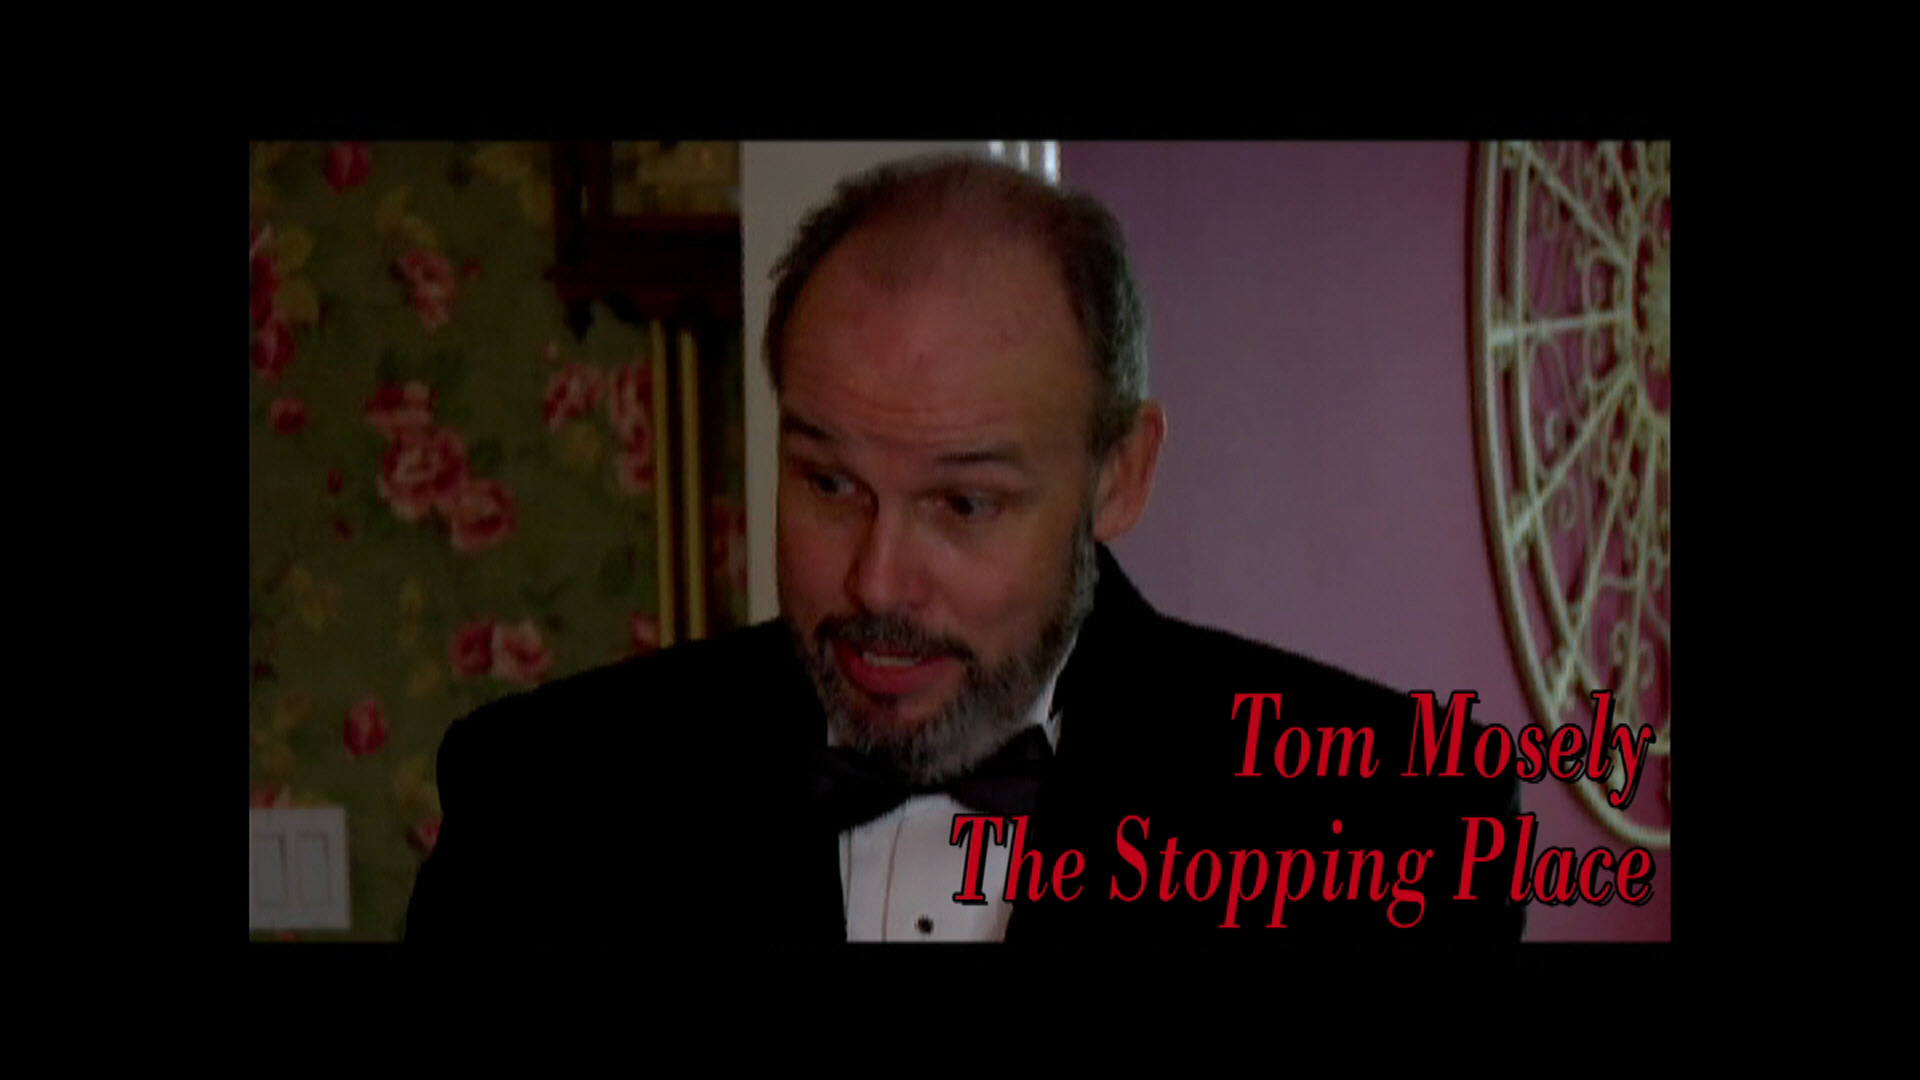 Feature film, The Stopping Place Staring as Tom Mosely